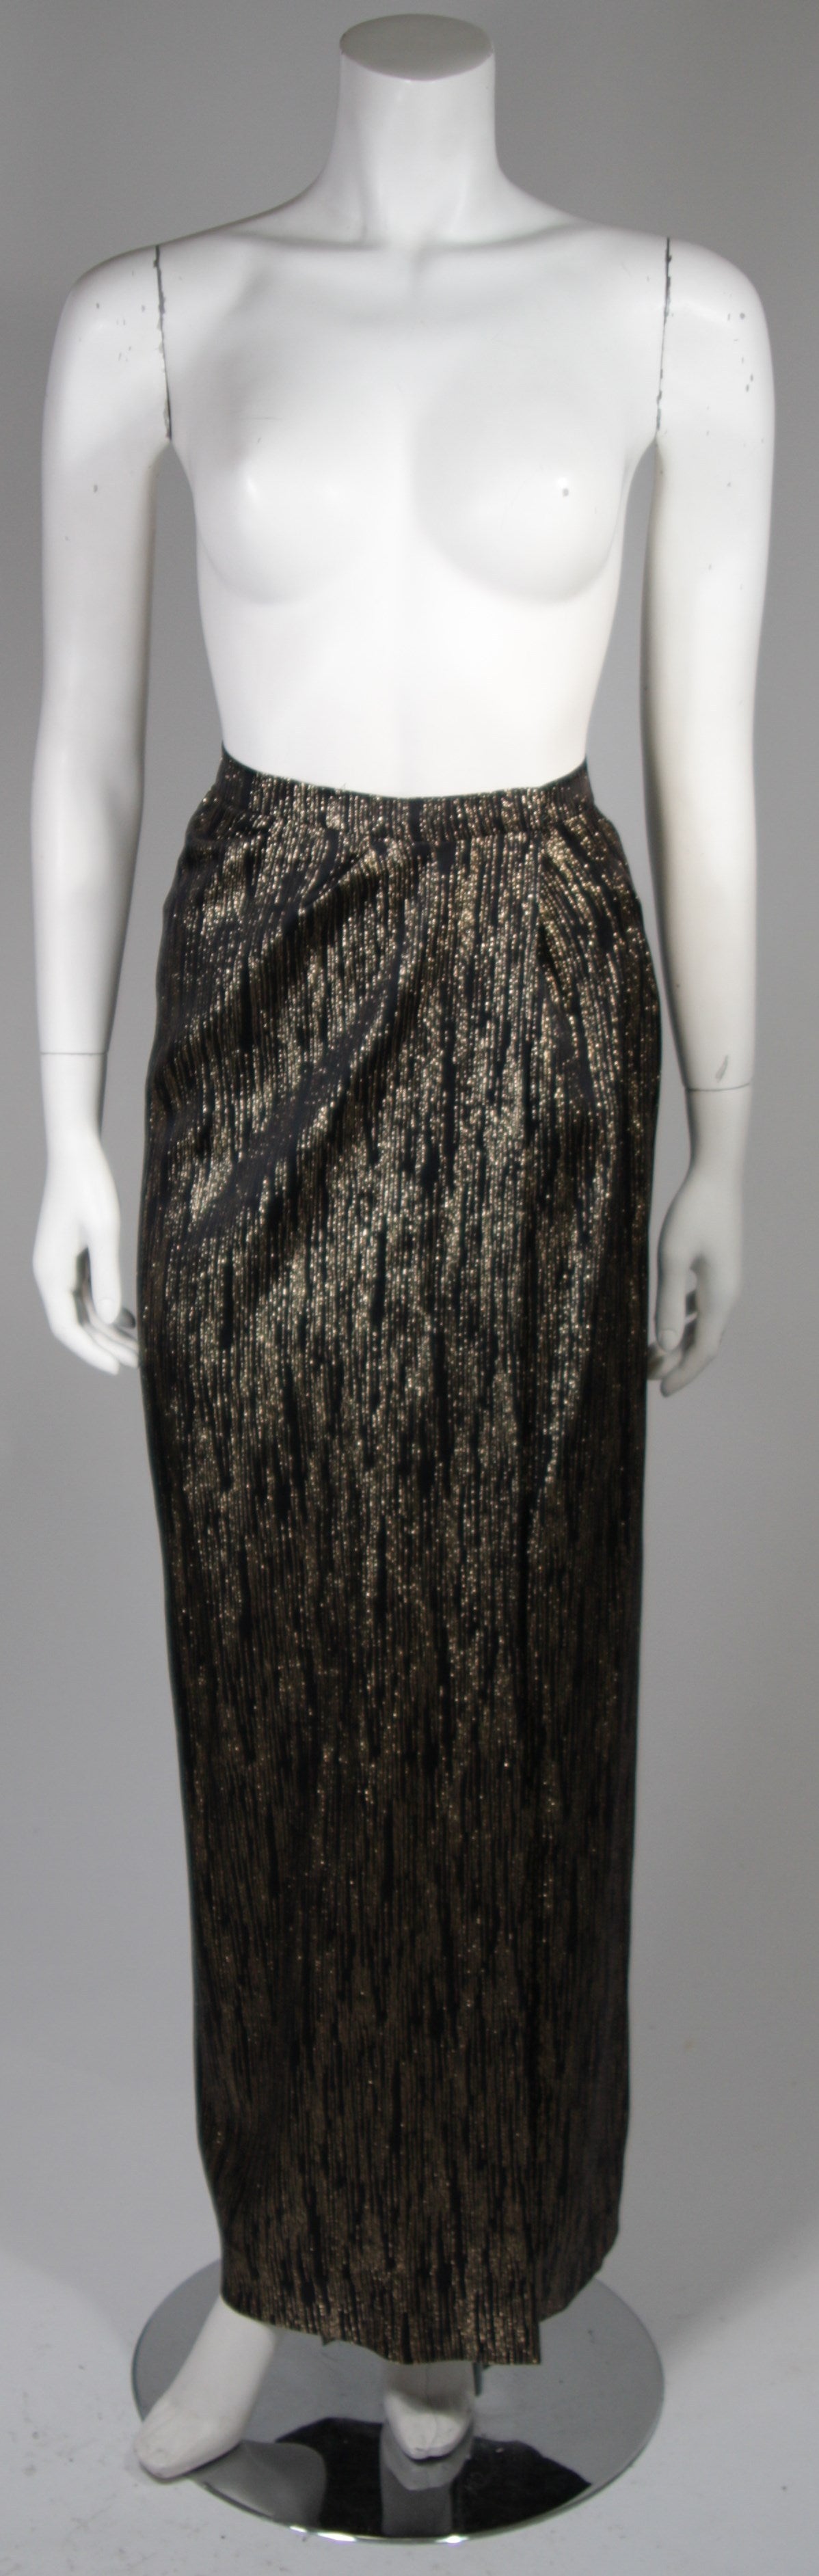 Nolan Miller Attributed Black and Gold Lame Ensemble Size Small 5